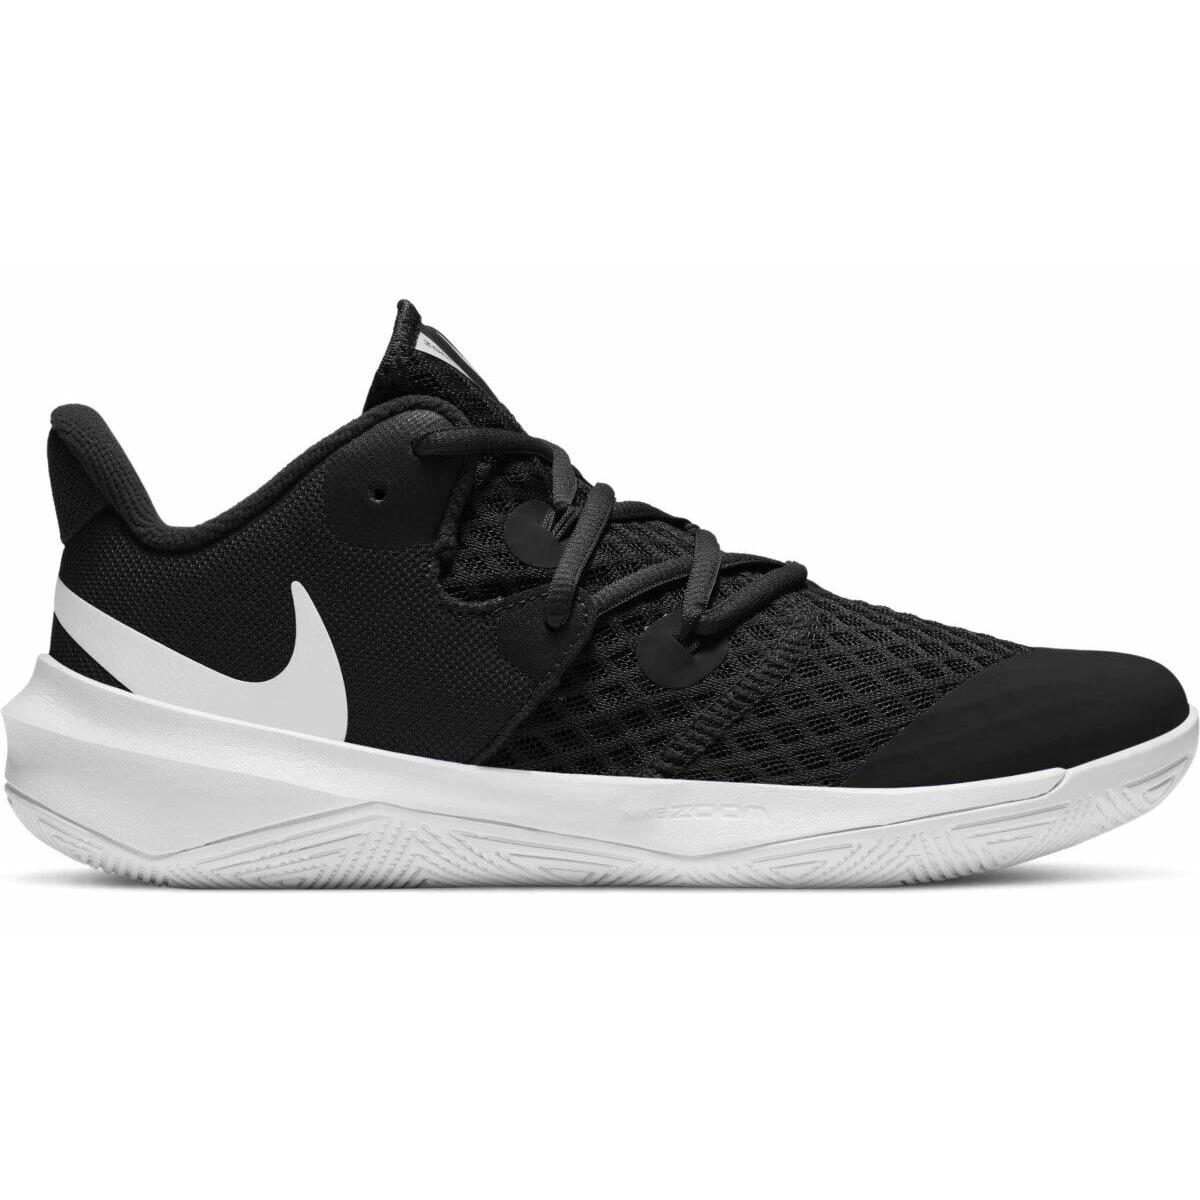 Nike Women`s Court Hyperspeed Volleyball Shoe Black/White